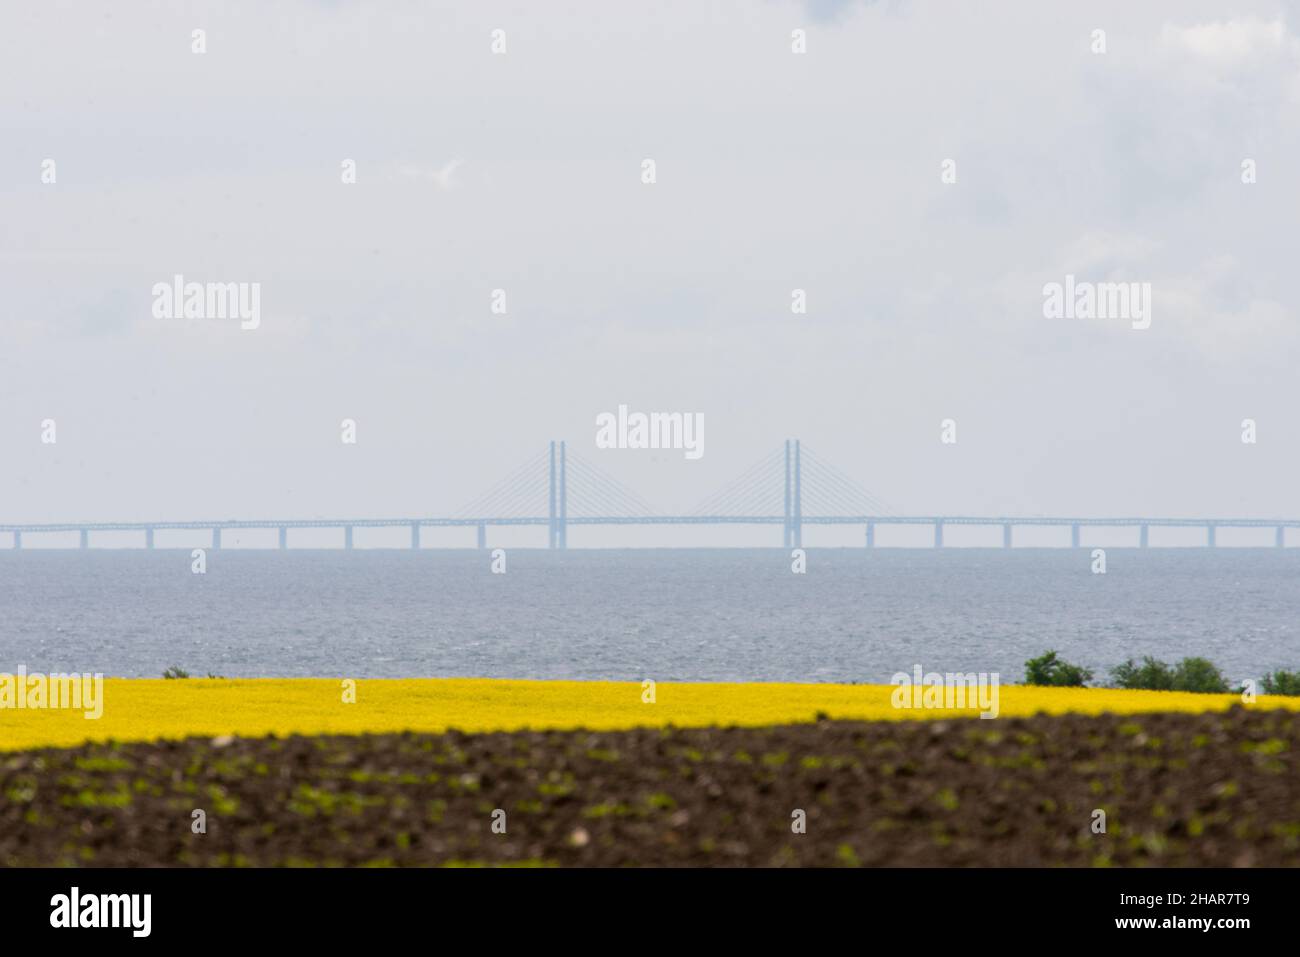 Landscape on the island Ven in spring with agricultural fields, the baltic sea and The Great Belt Fixed Link (Storebæltsforbindelsen) in the backgroun Stock Photo